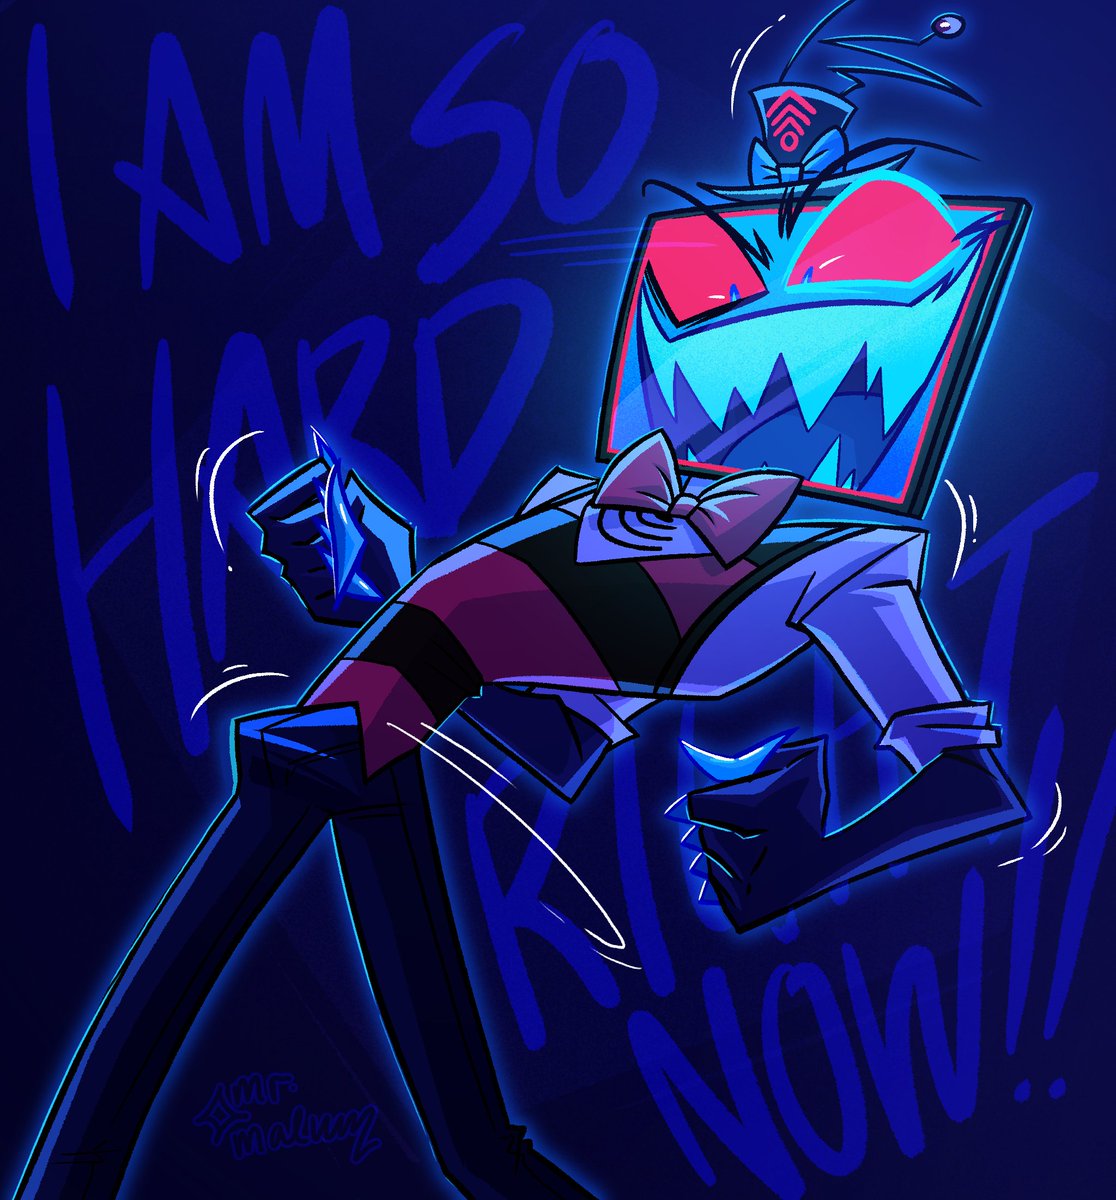 Guys hes SO hard right now #vox #hazbinhotelfanart #hazbin #hazbinhotel #hazbinhotelvox